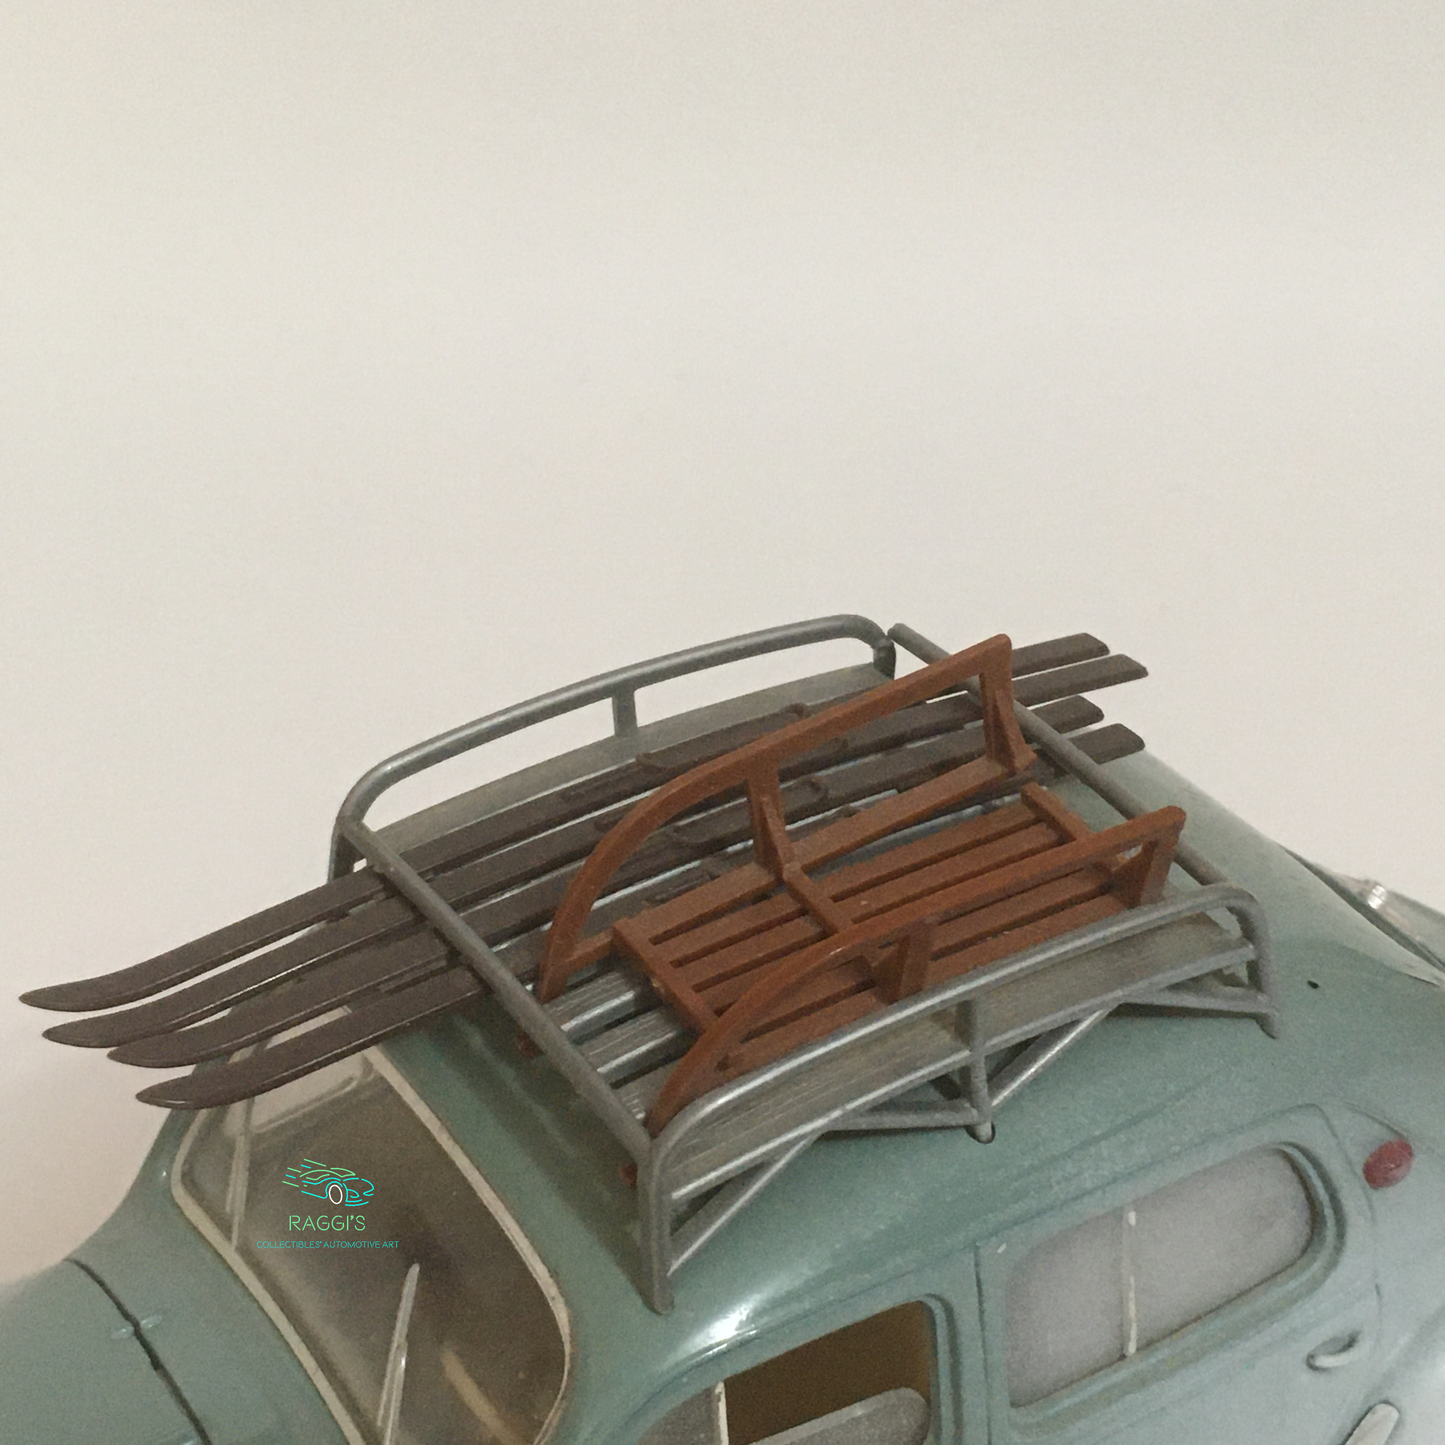 Renault, Solid Diecast Metal Model Renault 4CV Scale 1:17 Renault Collection Year 1997